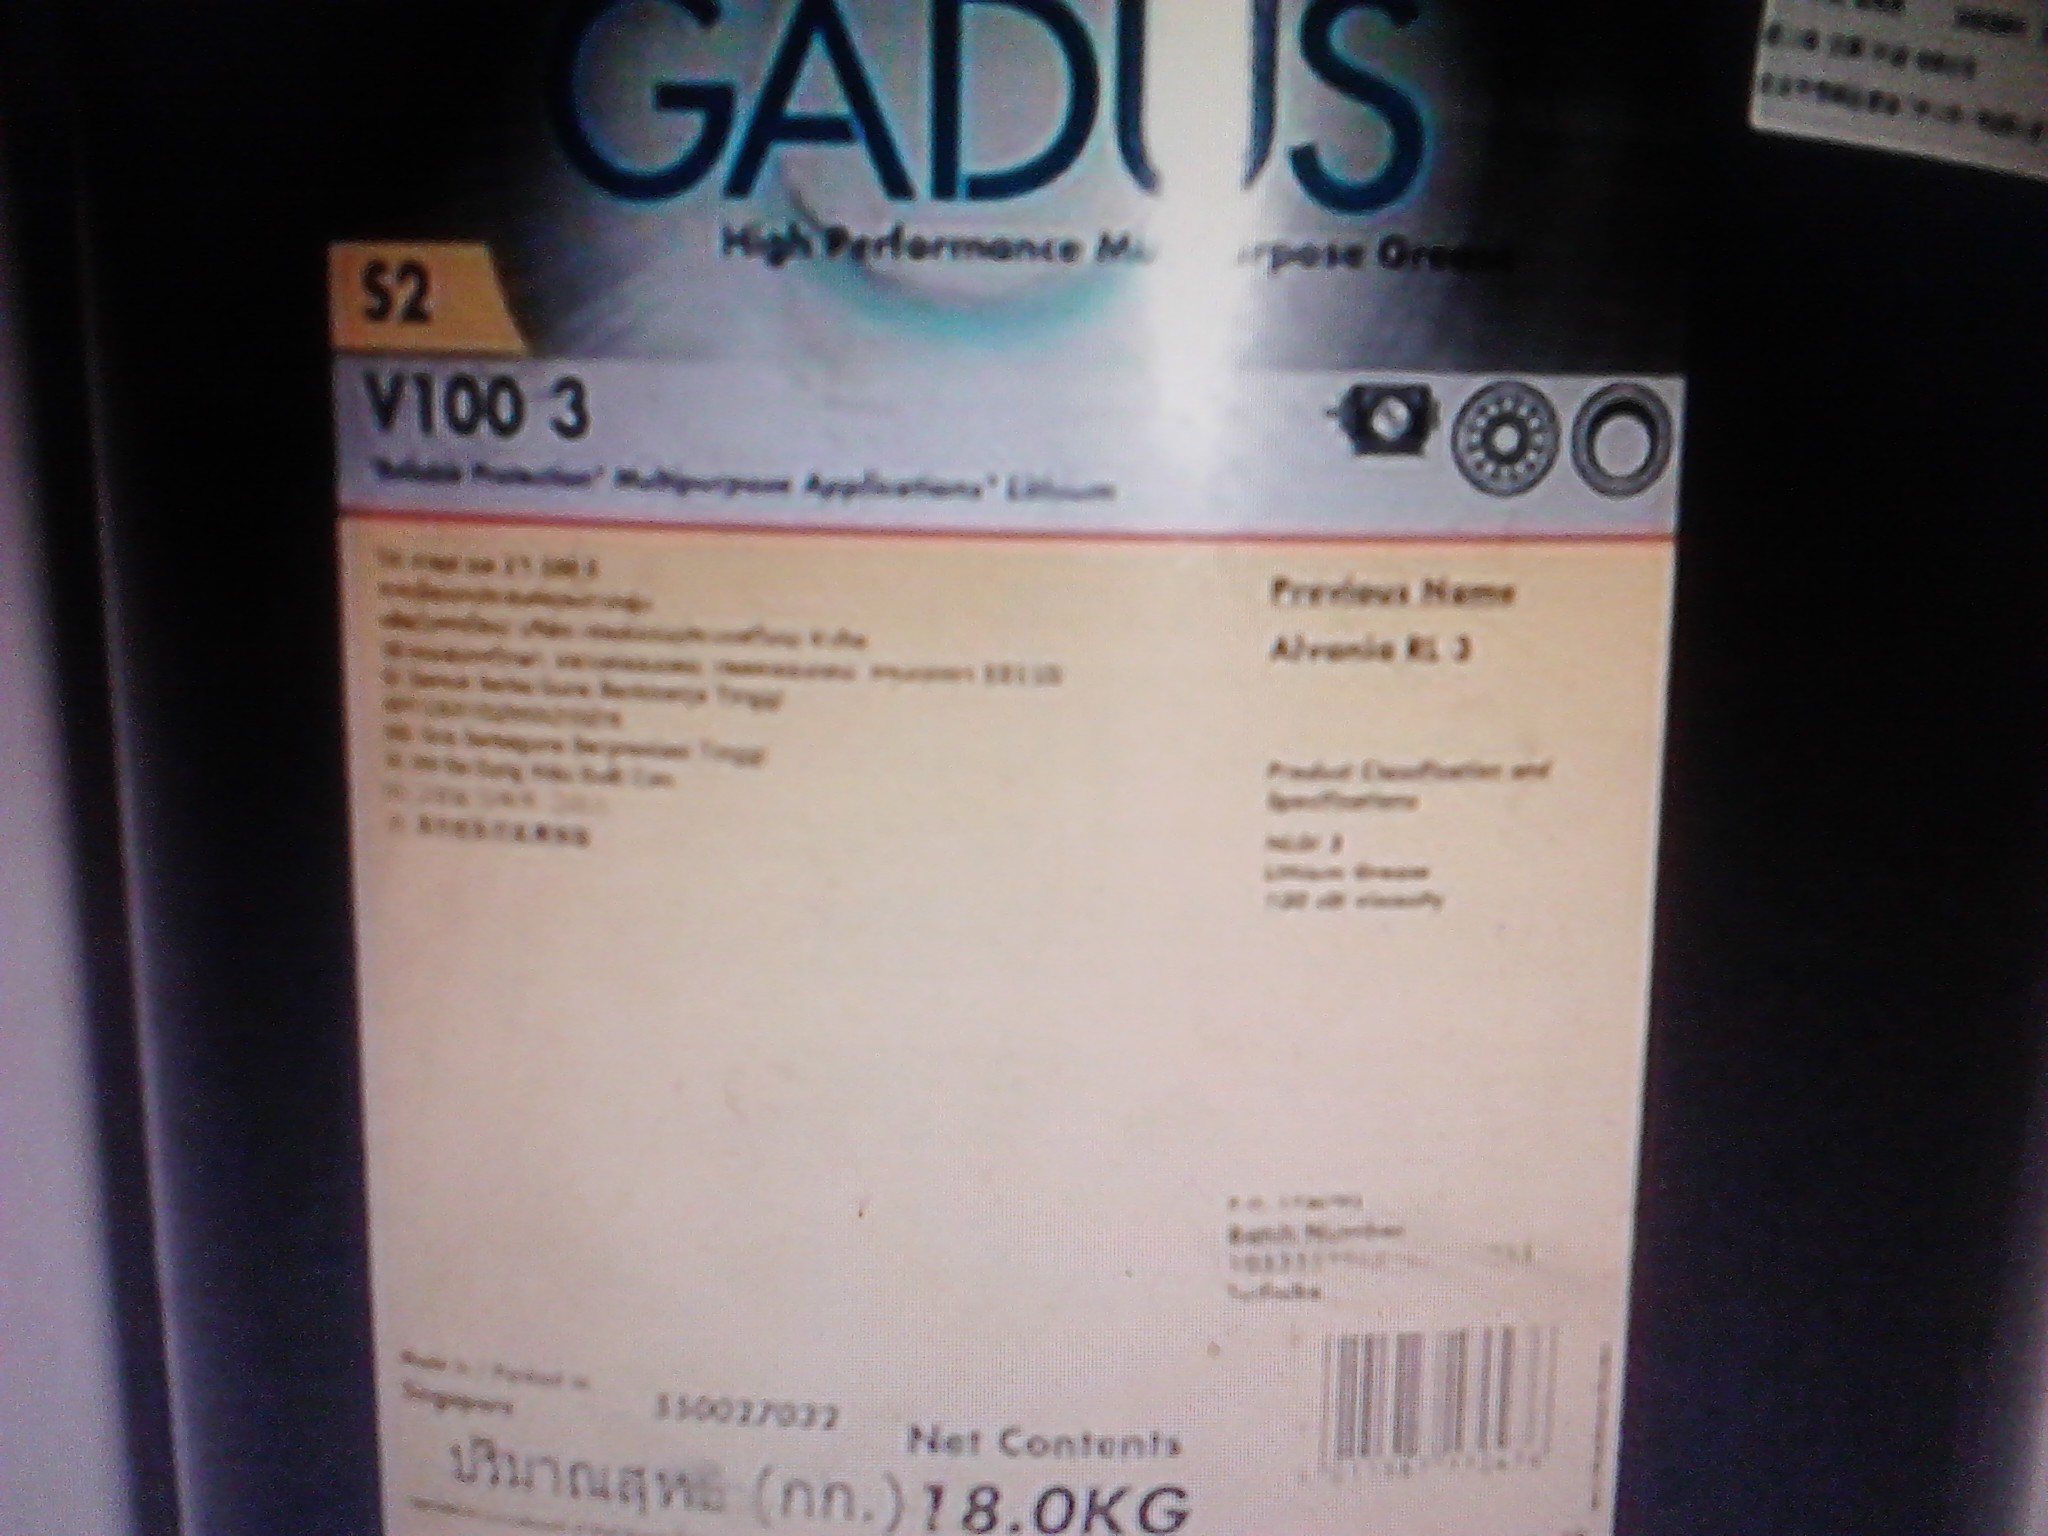 Shell Gadus S2 high Speed Coupling Grease